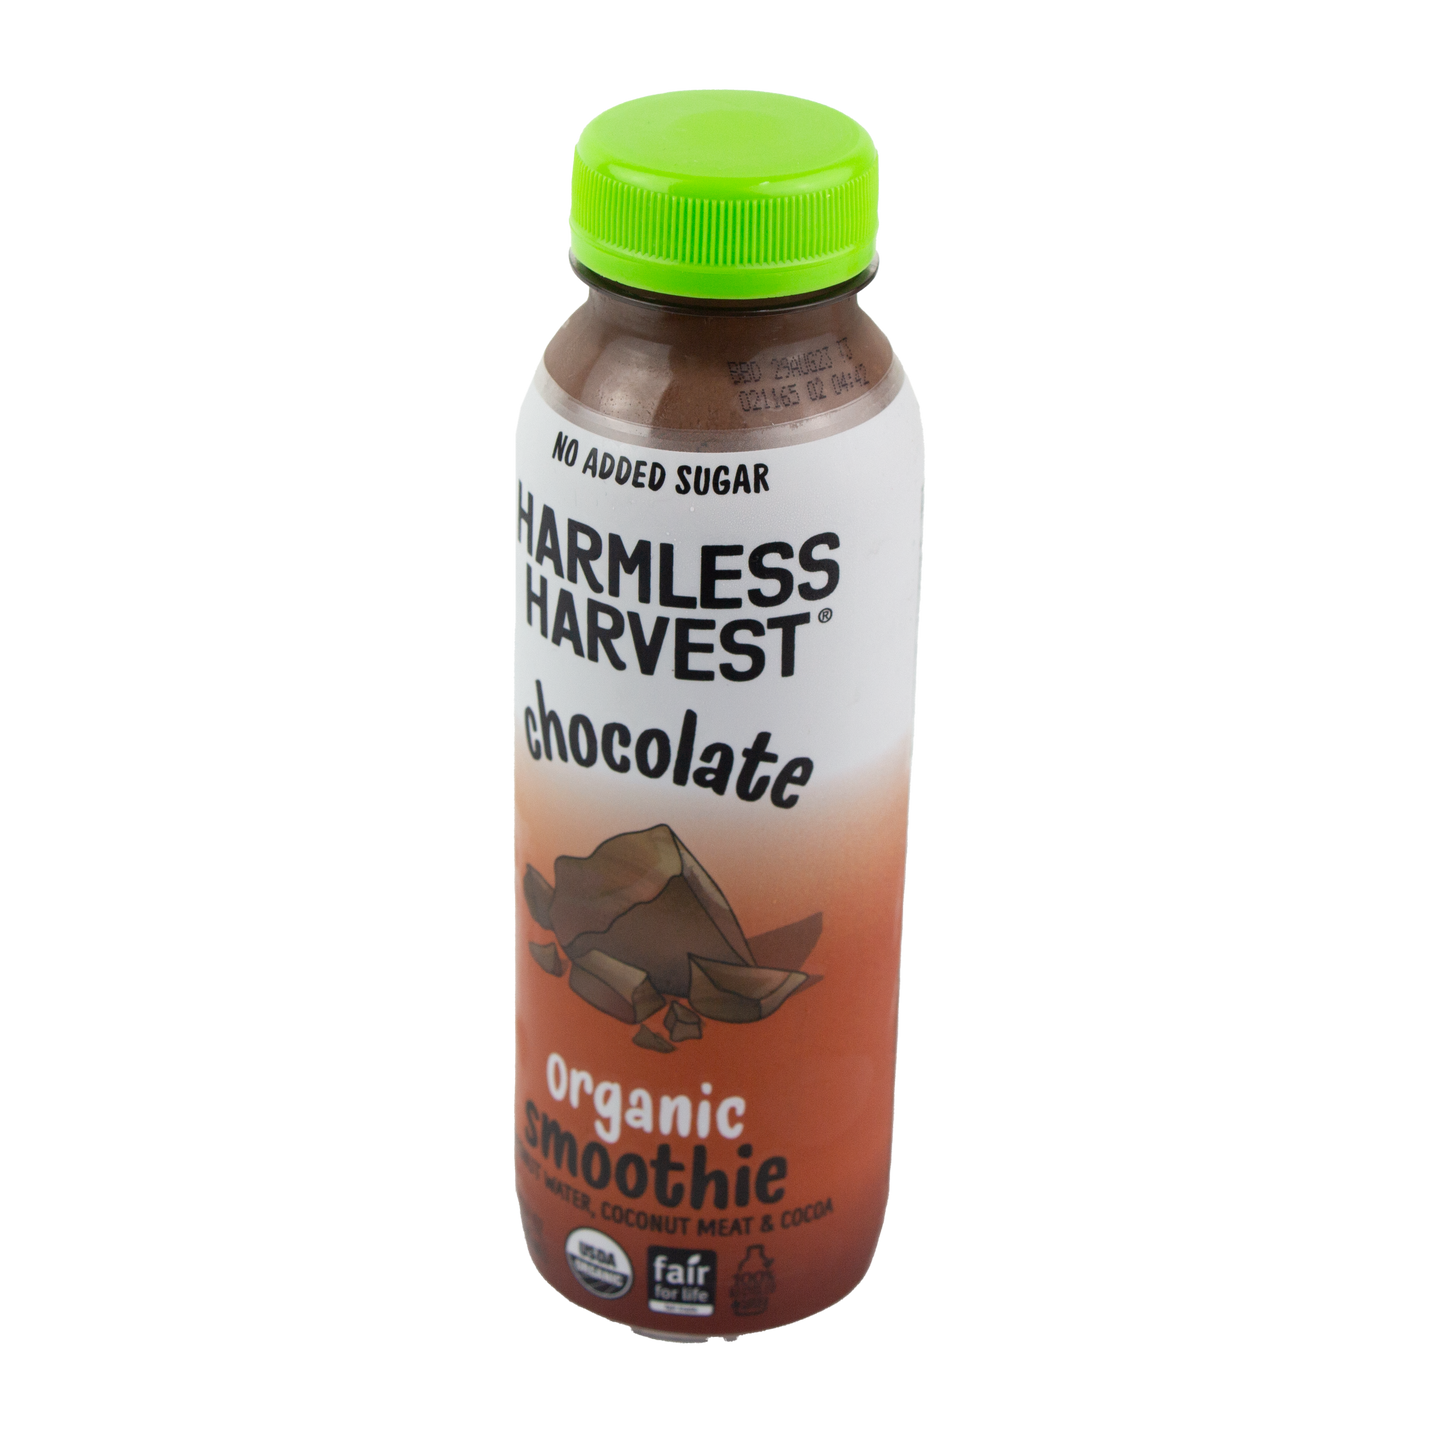 Harmless Harvest - Oraganic Smoothie Chocolate (Store Pick-Up Only)